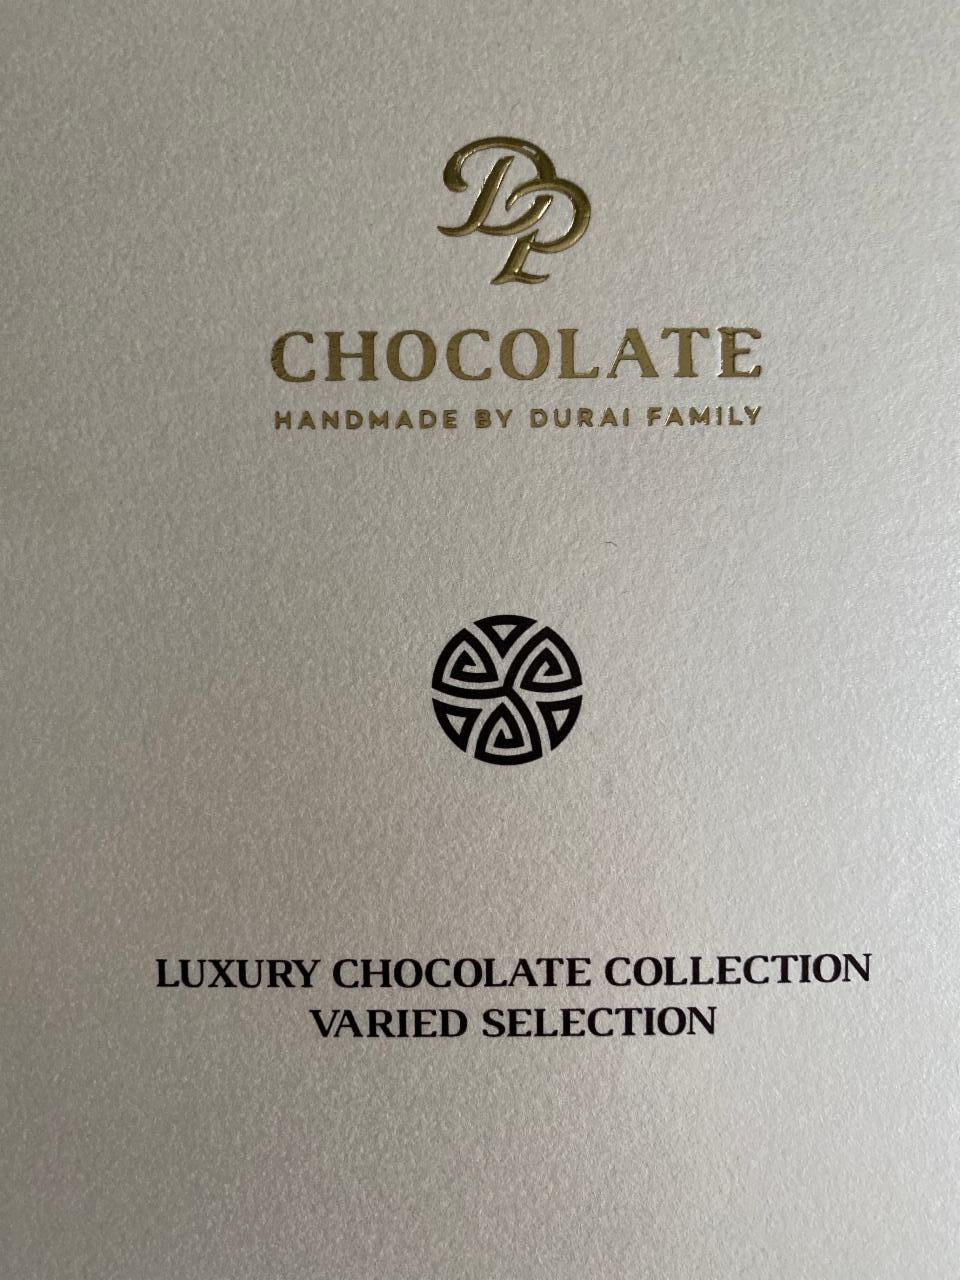 Fotografie - Luxury Chocolate Collection Varied Selection Berny DP Chocolate